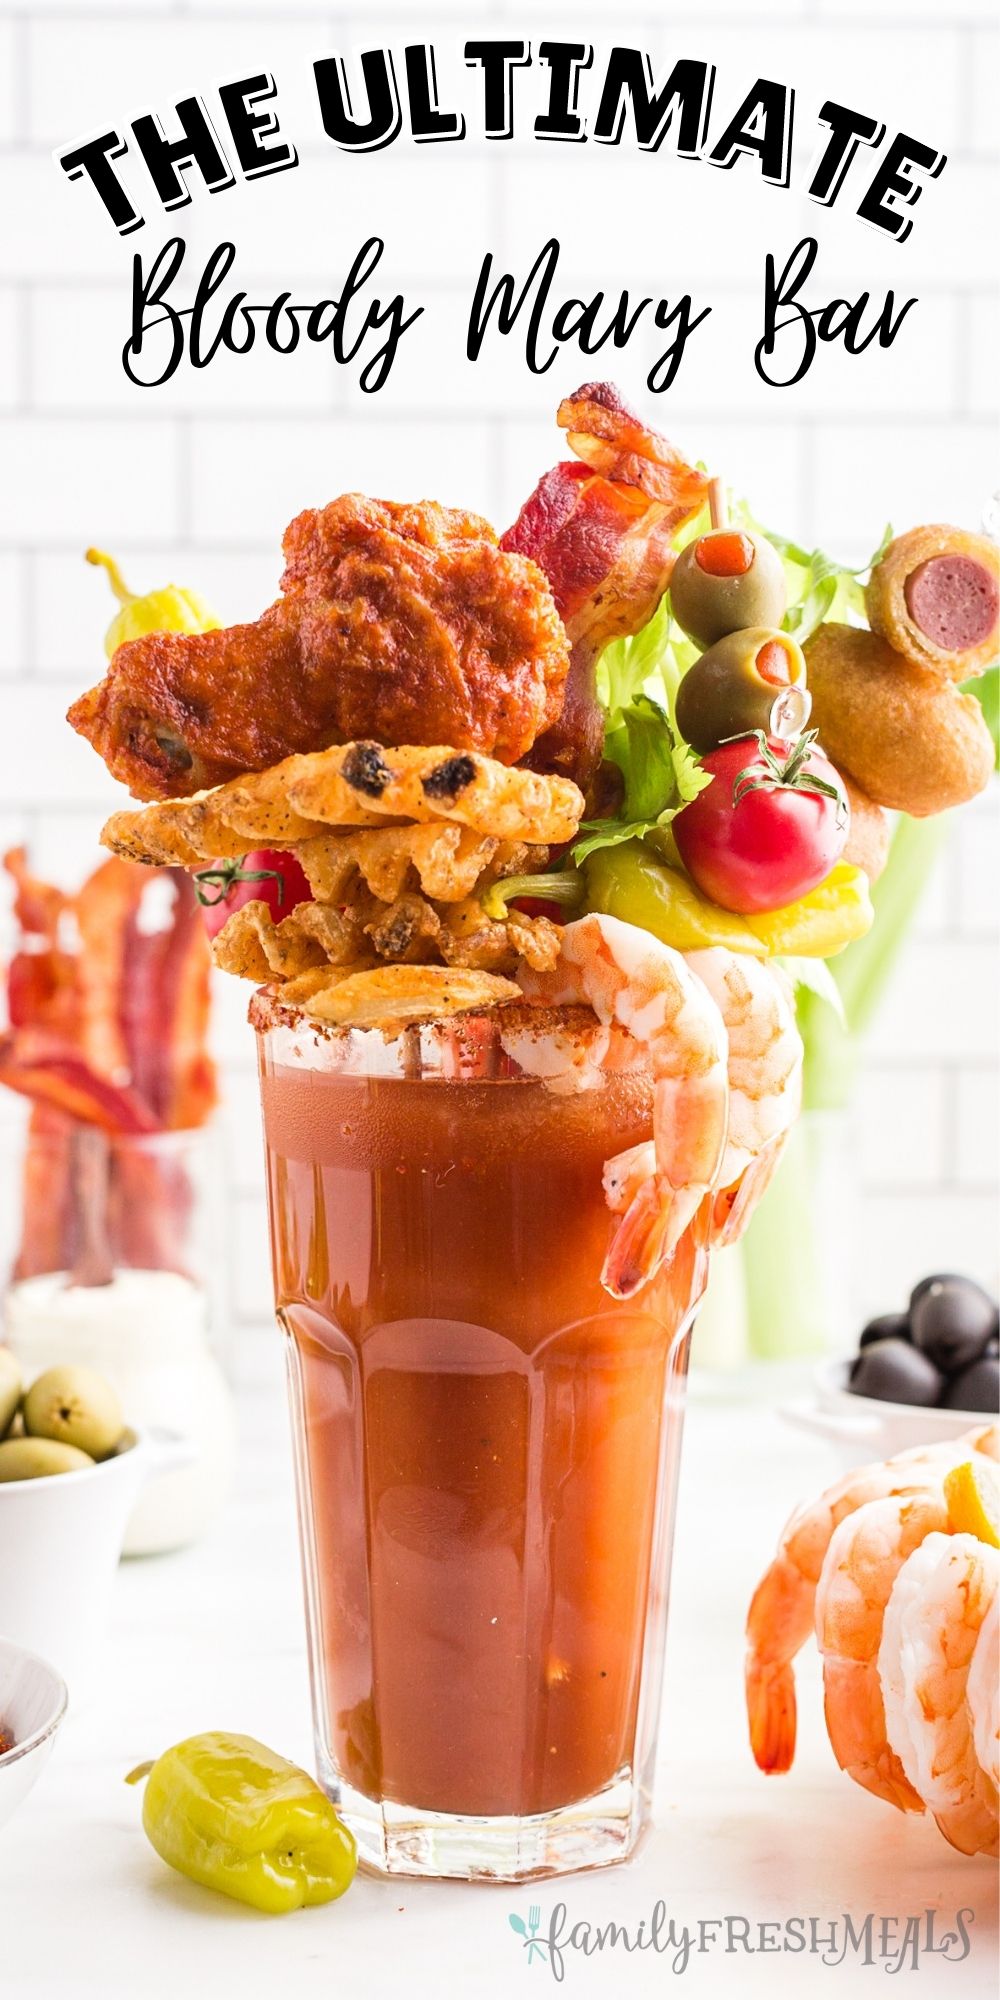 https://www.familyfreshmeals.com/wp-content/uploads/2021/12/The-Ultimate-Bloody-Mary-Bar-recipe-from-Family-Fresh-Meals.jpg